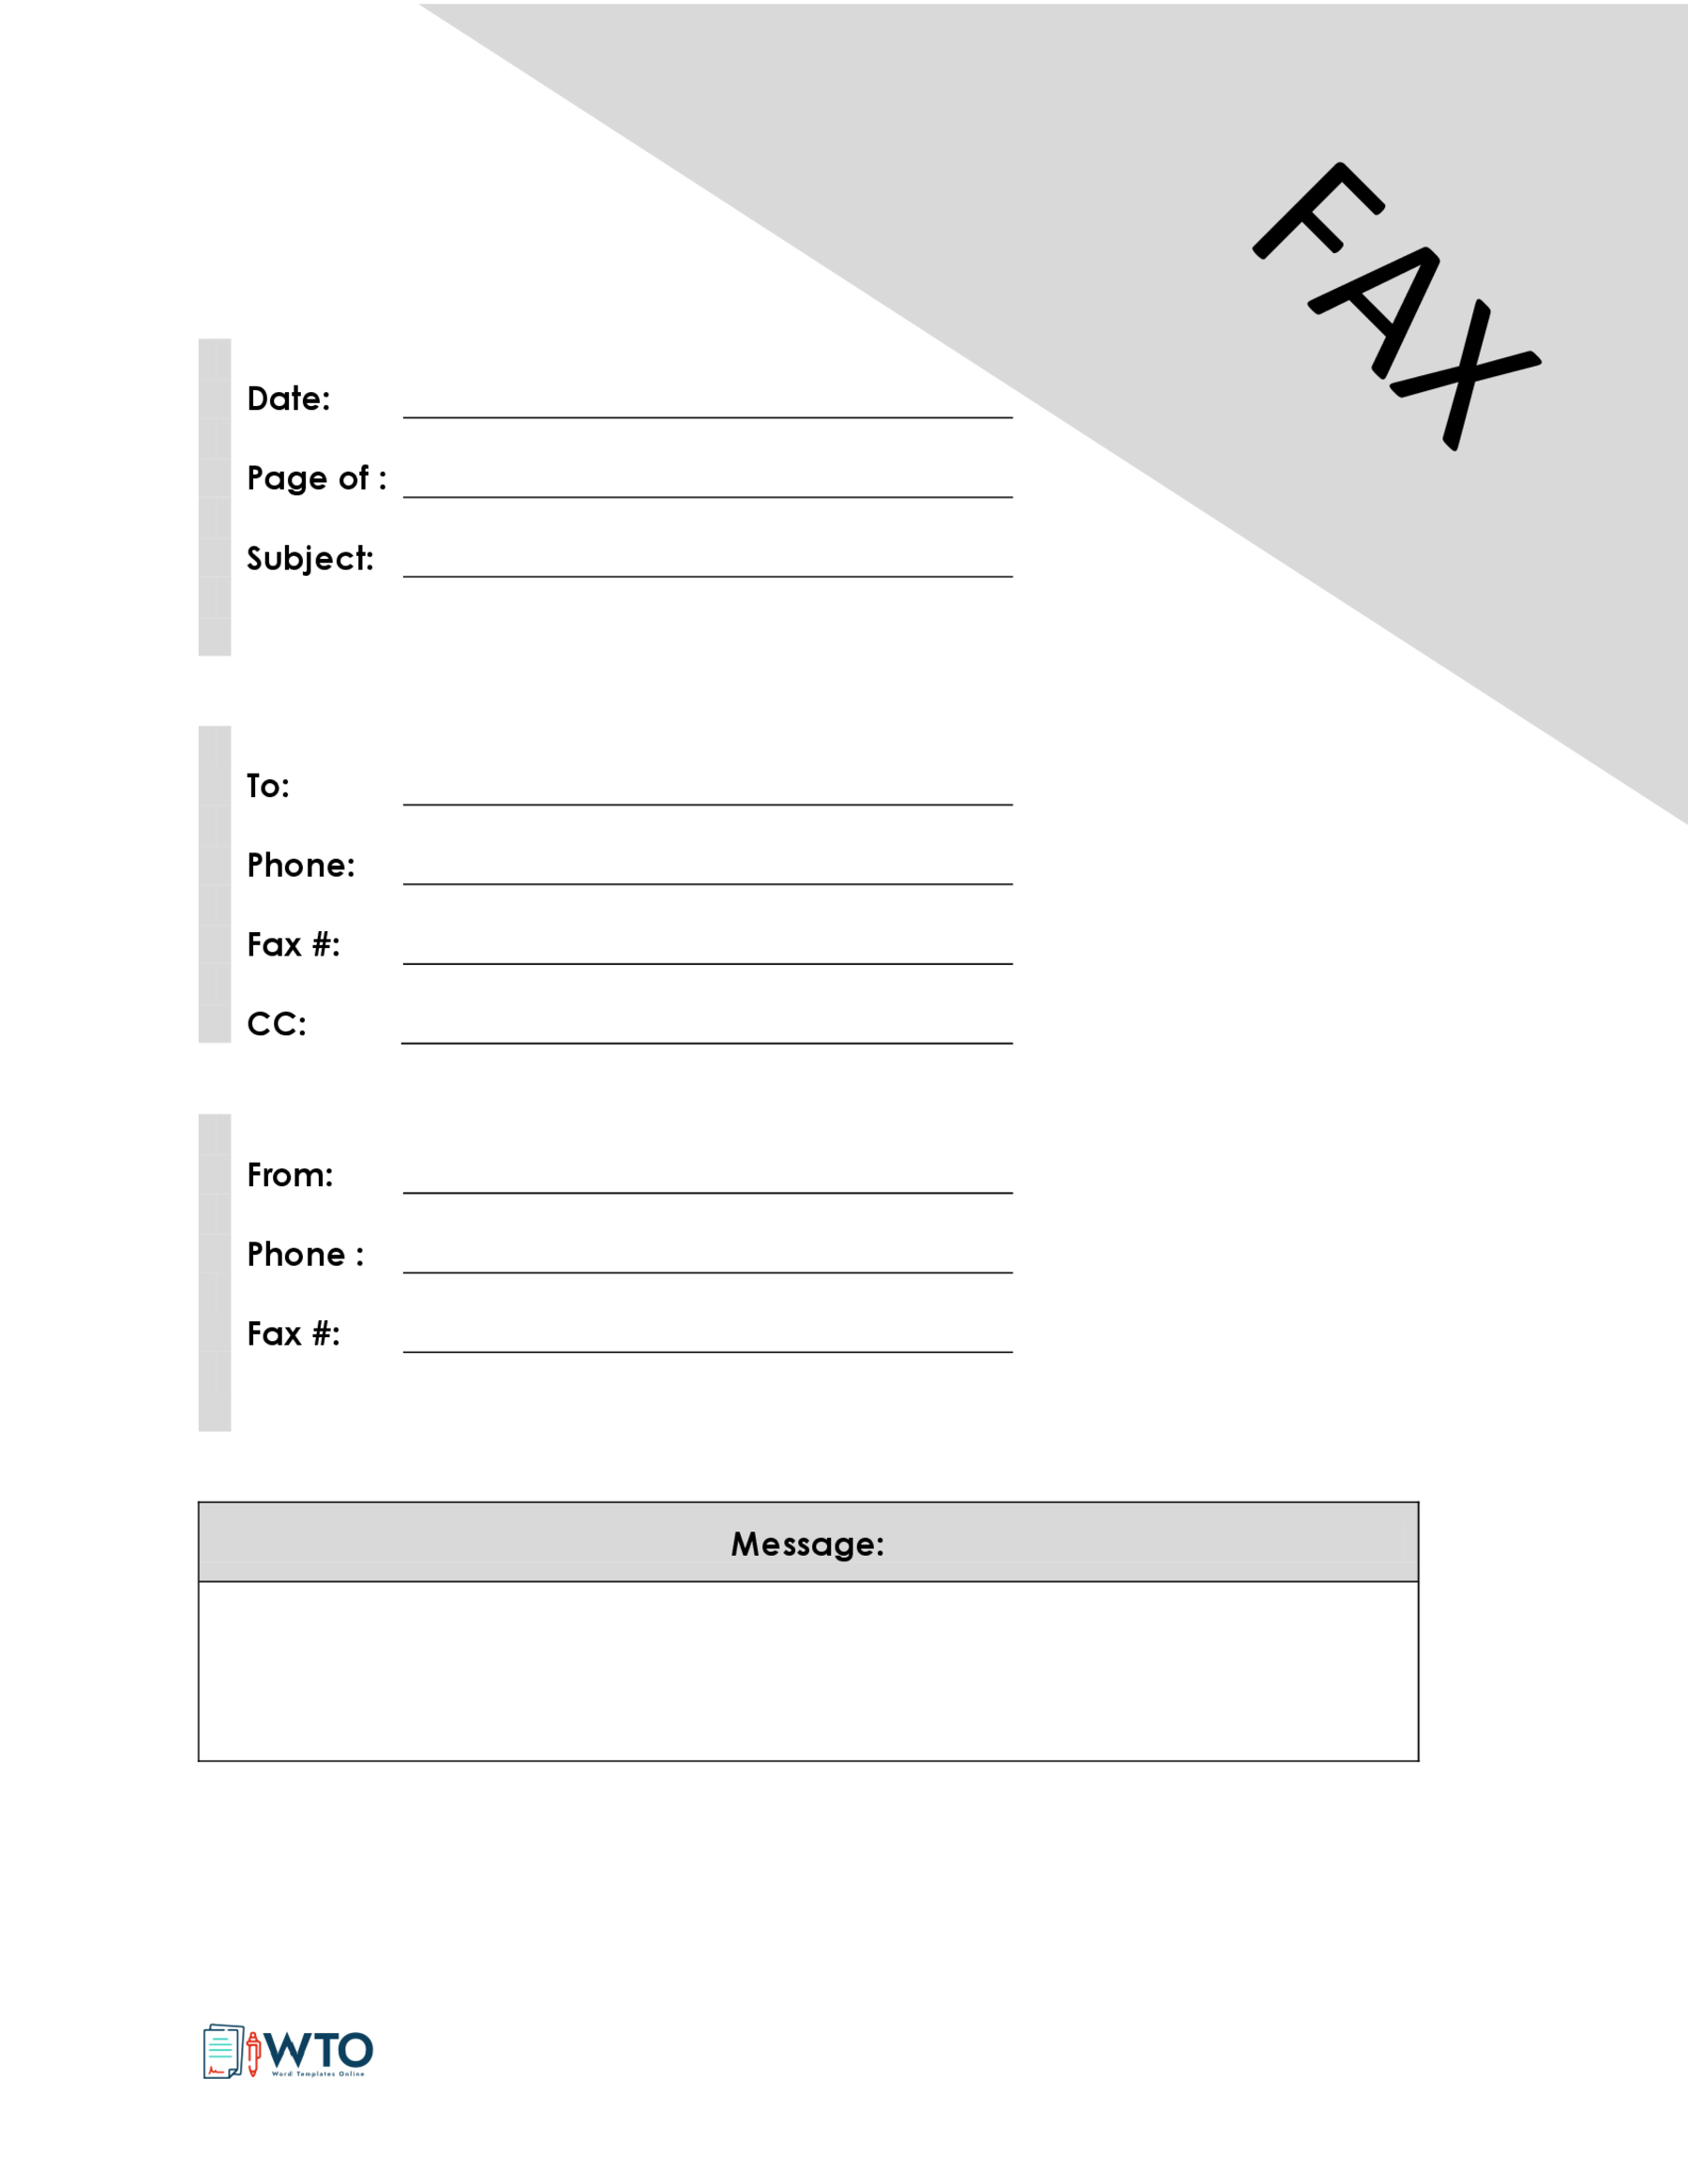 Fax Cover Sheet Sample for Office Use